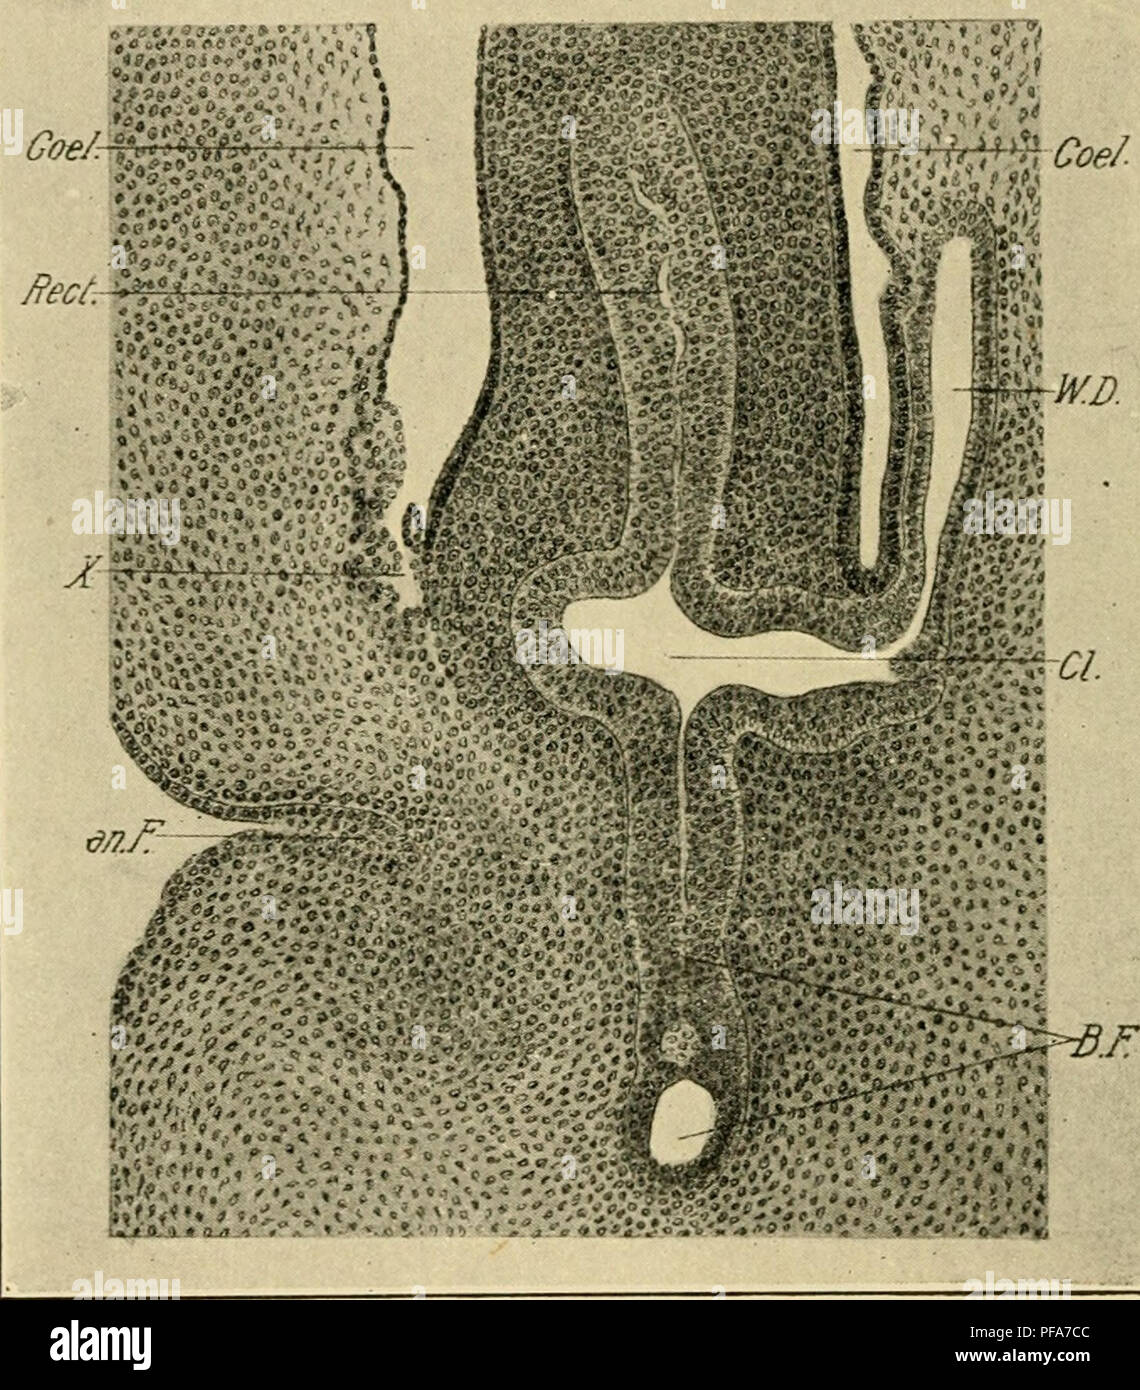 . The development of the chick : an introduction to embryology. Embryology; Chickens -- Embryos. 316 THE DEVELOPMENT OF THE CHICK cloacal membrane, is the neck of the allantois, and dorsal to this, the large intestine. Though not shown in the figure, it may be noted that the Wolffian ducts open into the cloaca behind and dorsal to the opening of the rectum. The appearance of the cloaca in a longitudinal section does not, however, give an adequate idea of its form. The anterior portion of the cloaca which receives the rectum, stalk of the allantois and Wolffian ducts is expanded considerably in Stock Photo